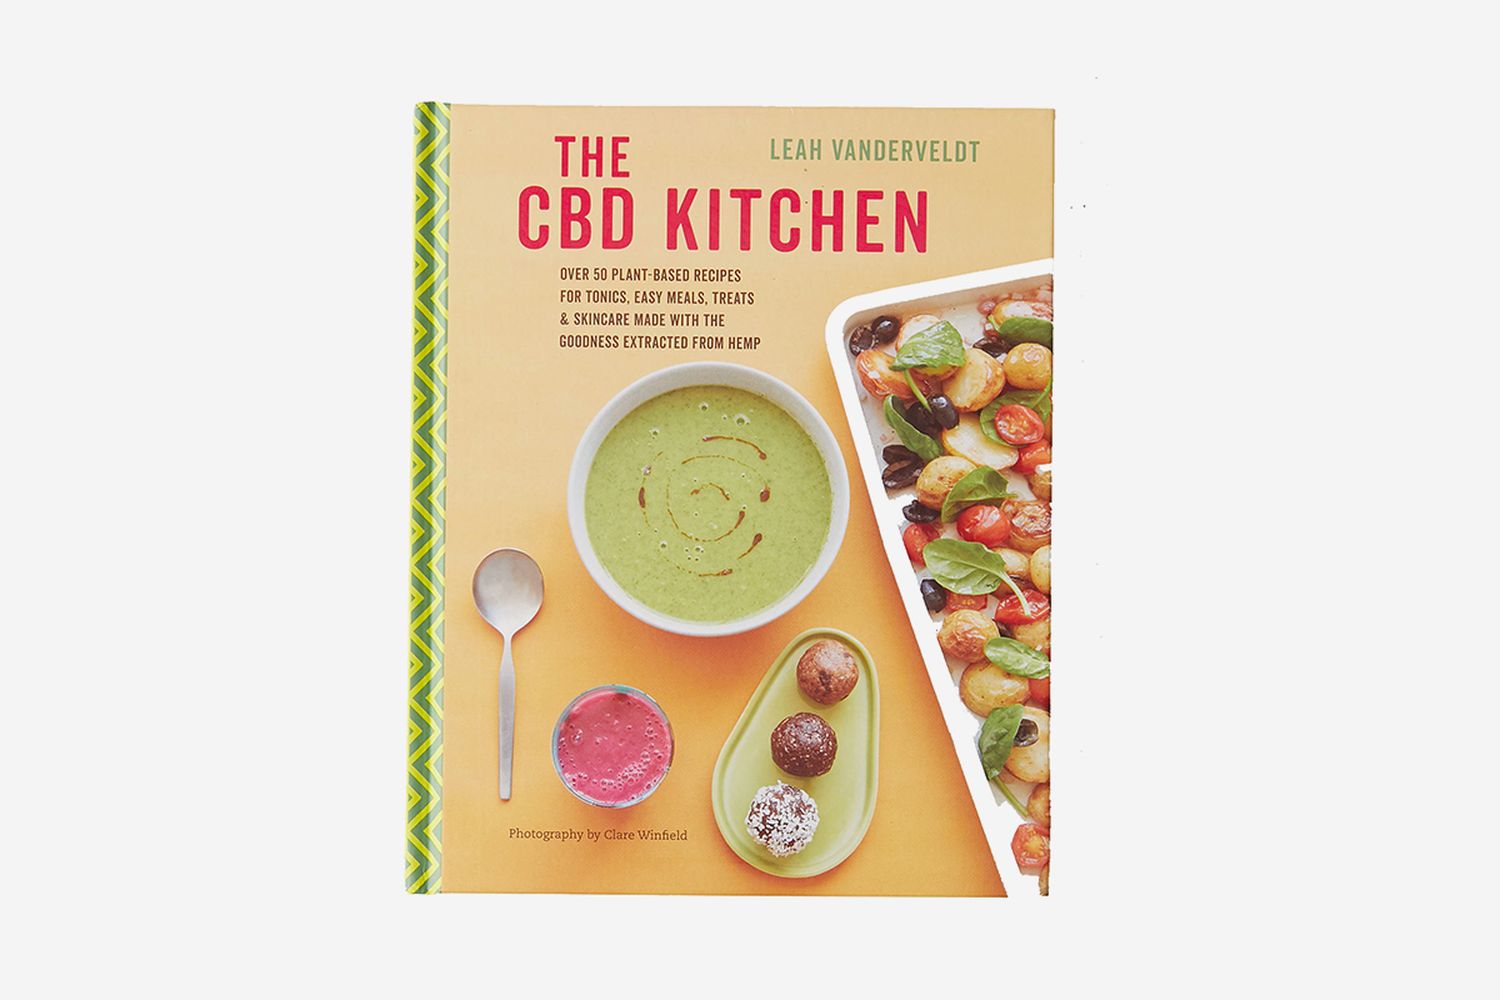 The CBD Kitchen: Over 50 Plant-Based Recipes for Tonics, Easy Meals, Treats & Skincare